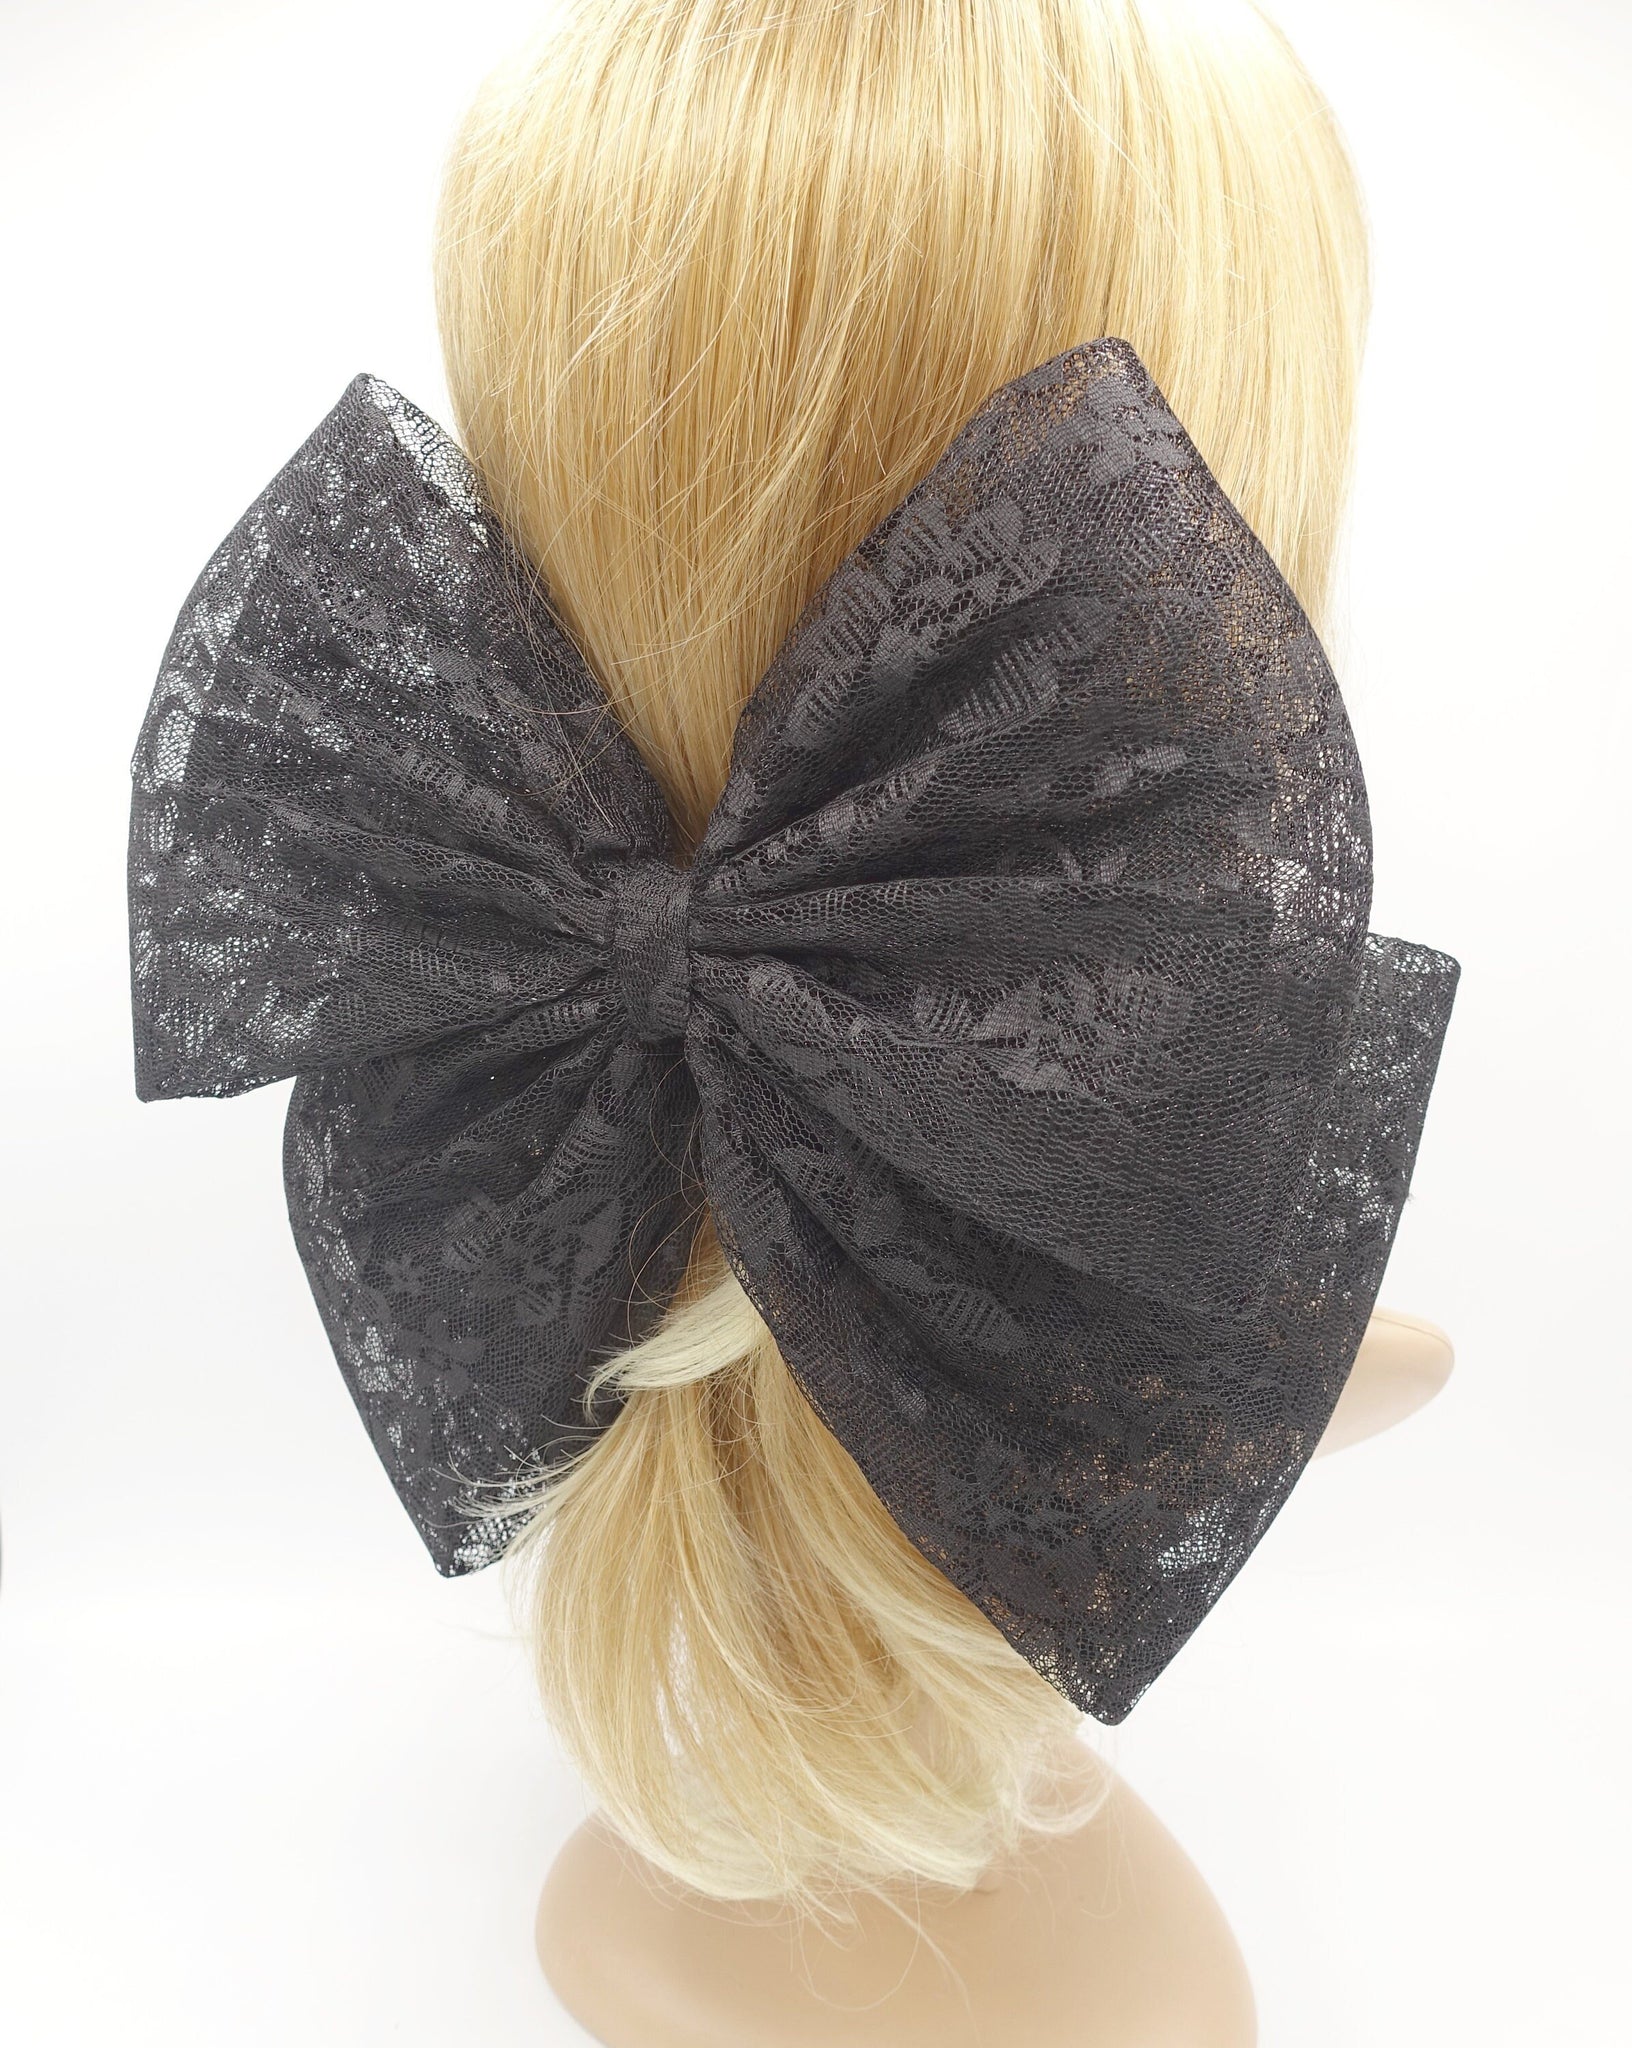 VeryShine claw/banana/barrette Black lace patterned Jumbo bow event cosplay hair accessory for women